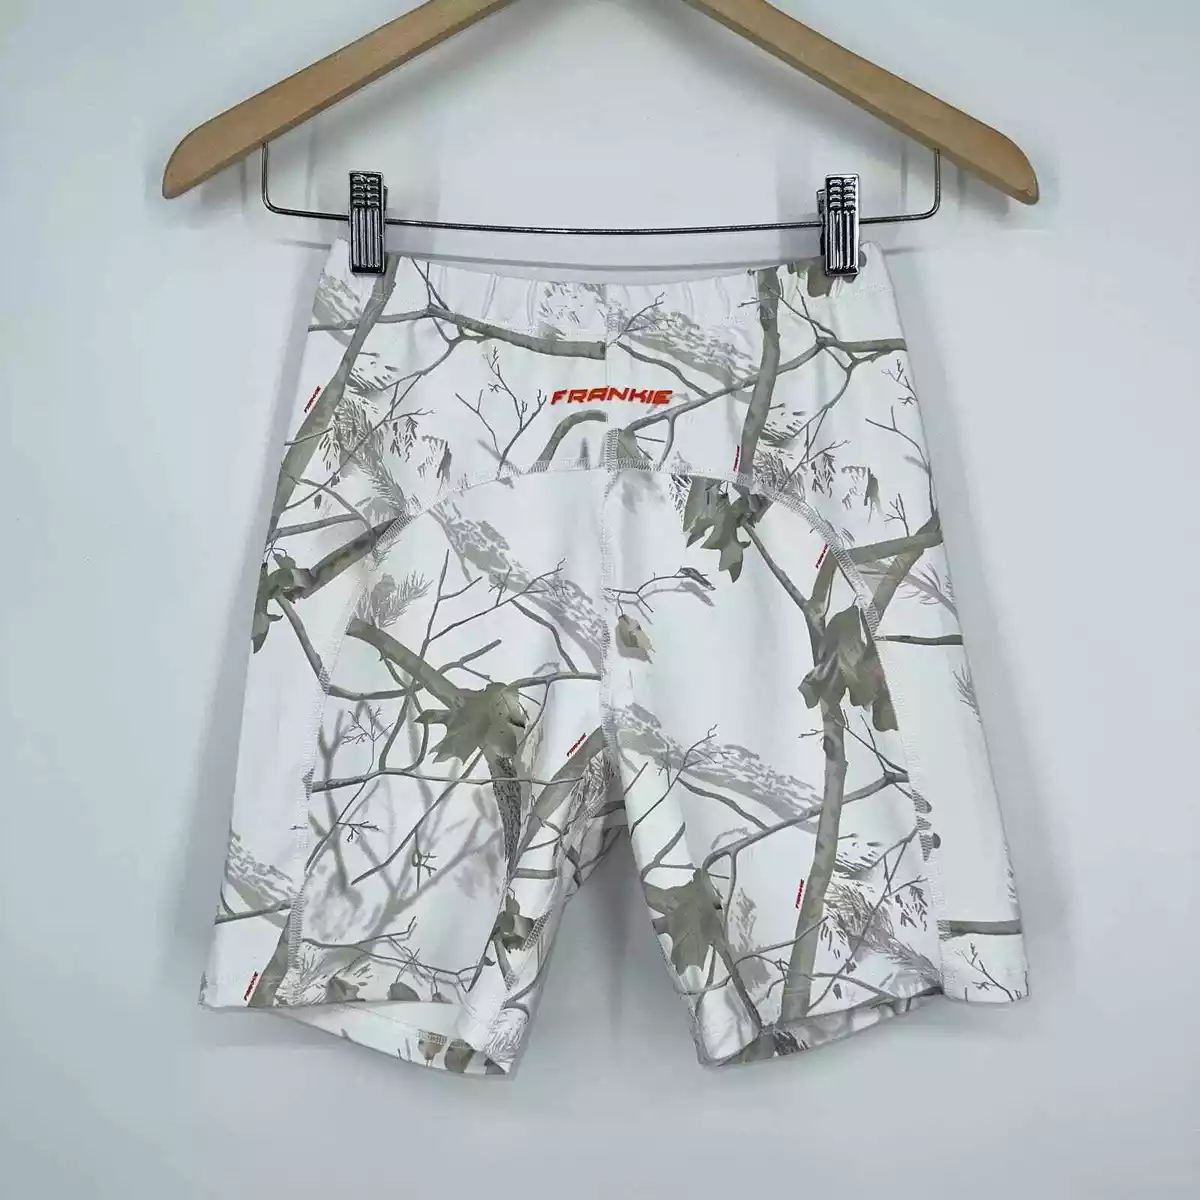 NWT Frankie Collective F1 Icy Bike Shorts, Size Small, Hunting